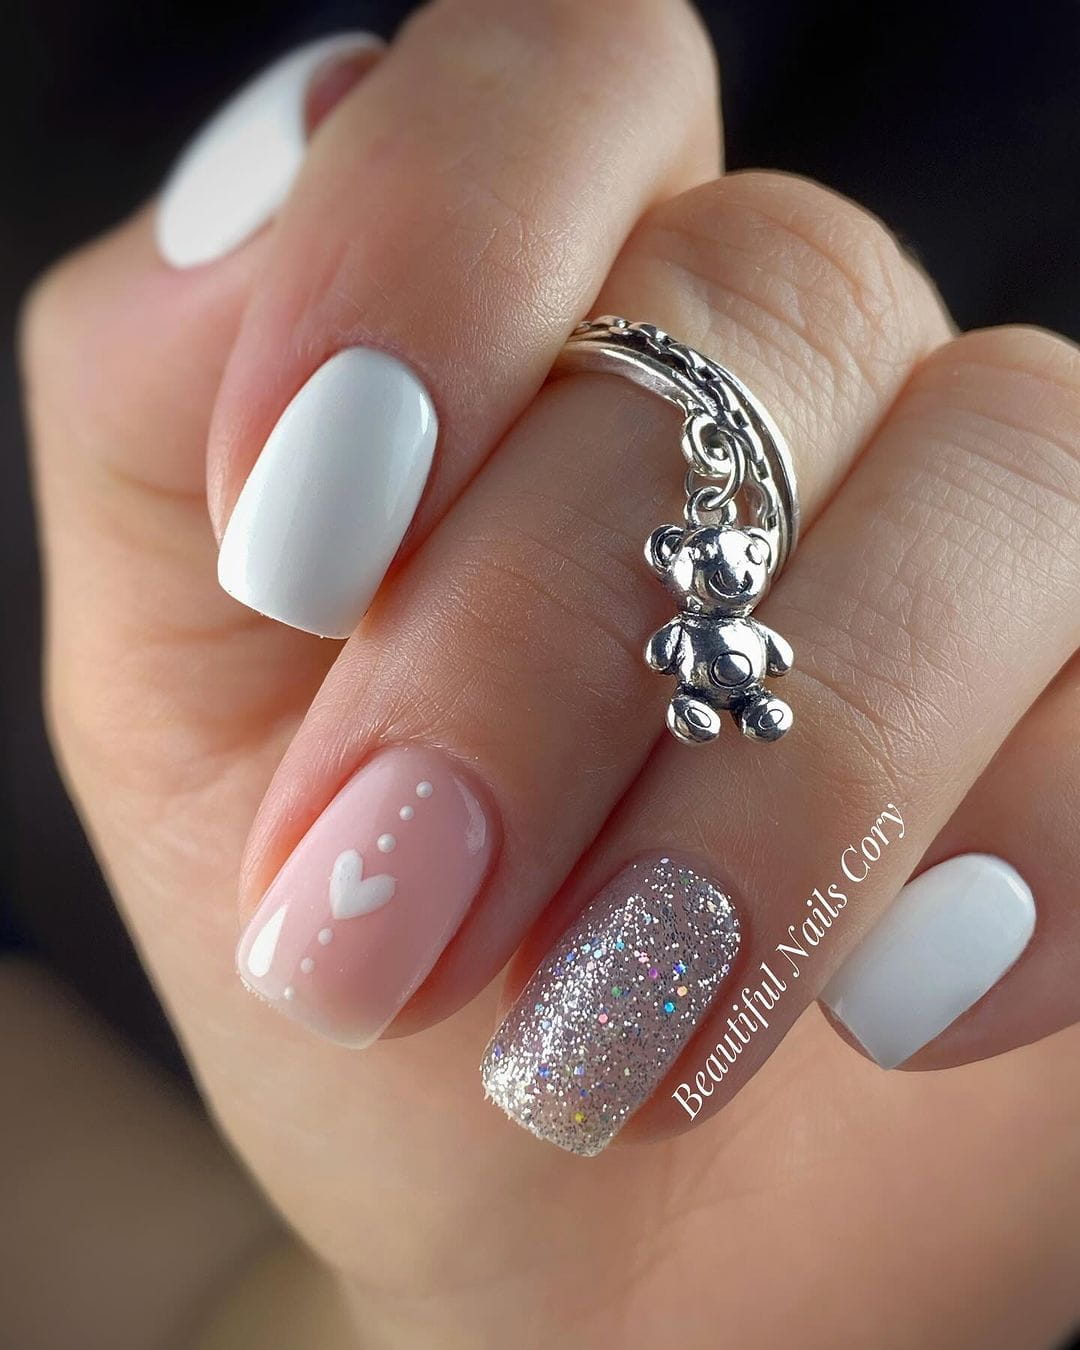 100 Pretty Spring Nail Designs To Try This Year images 7